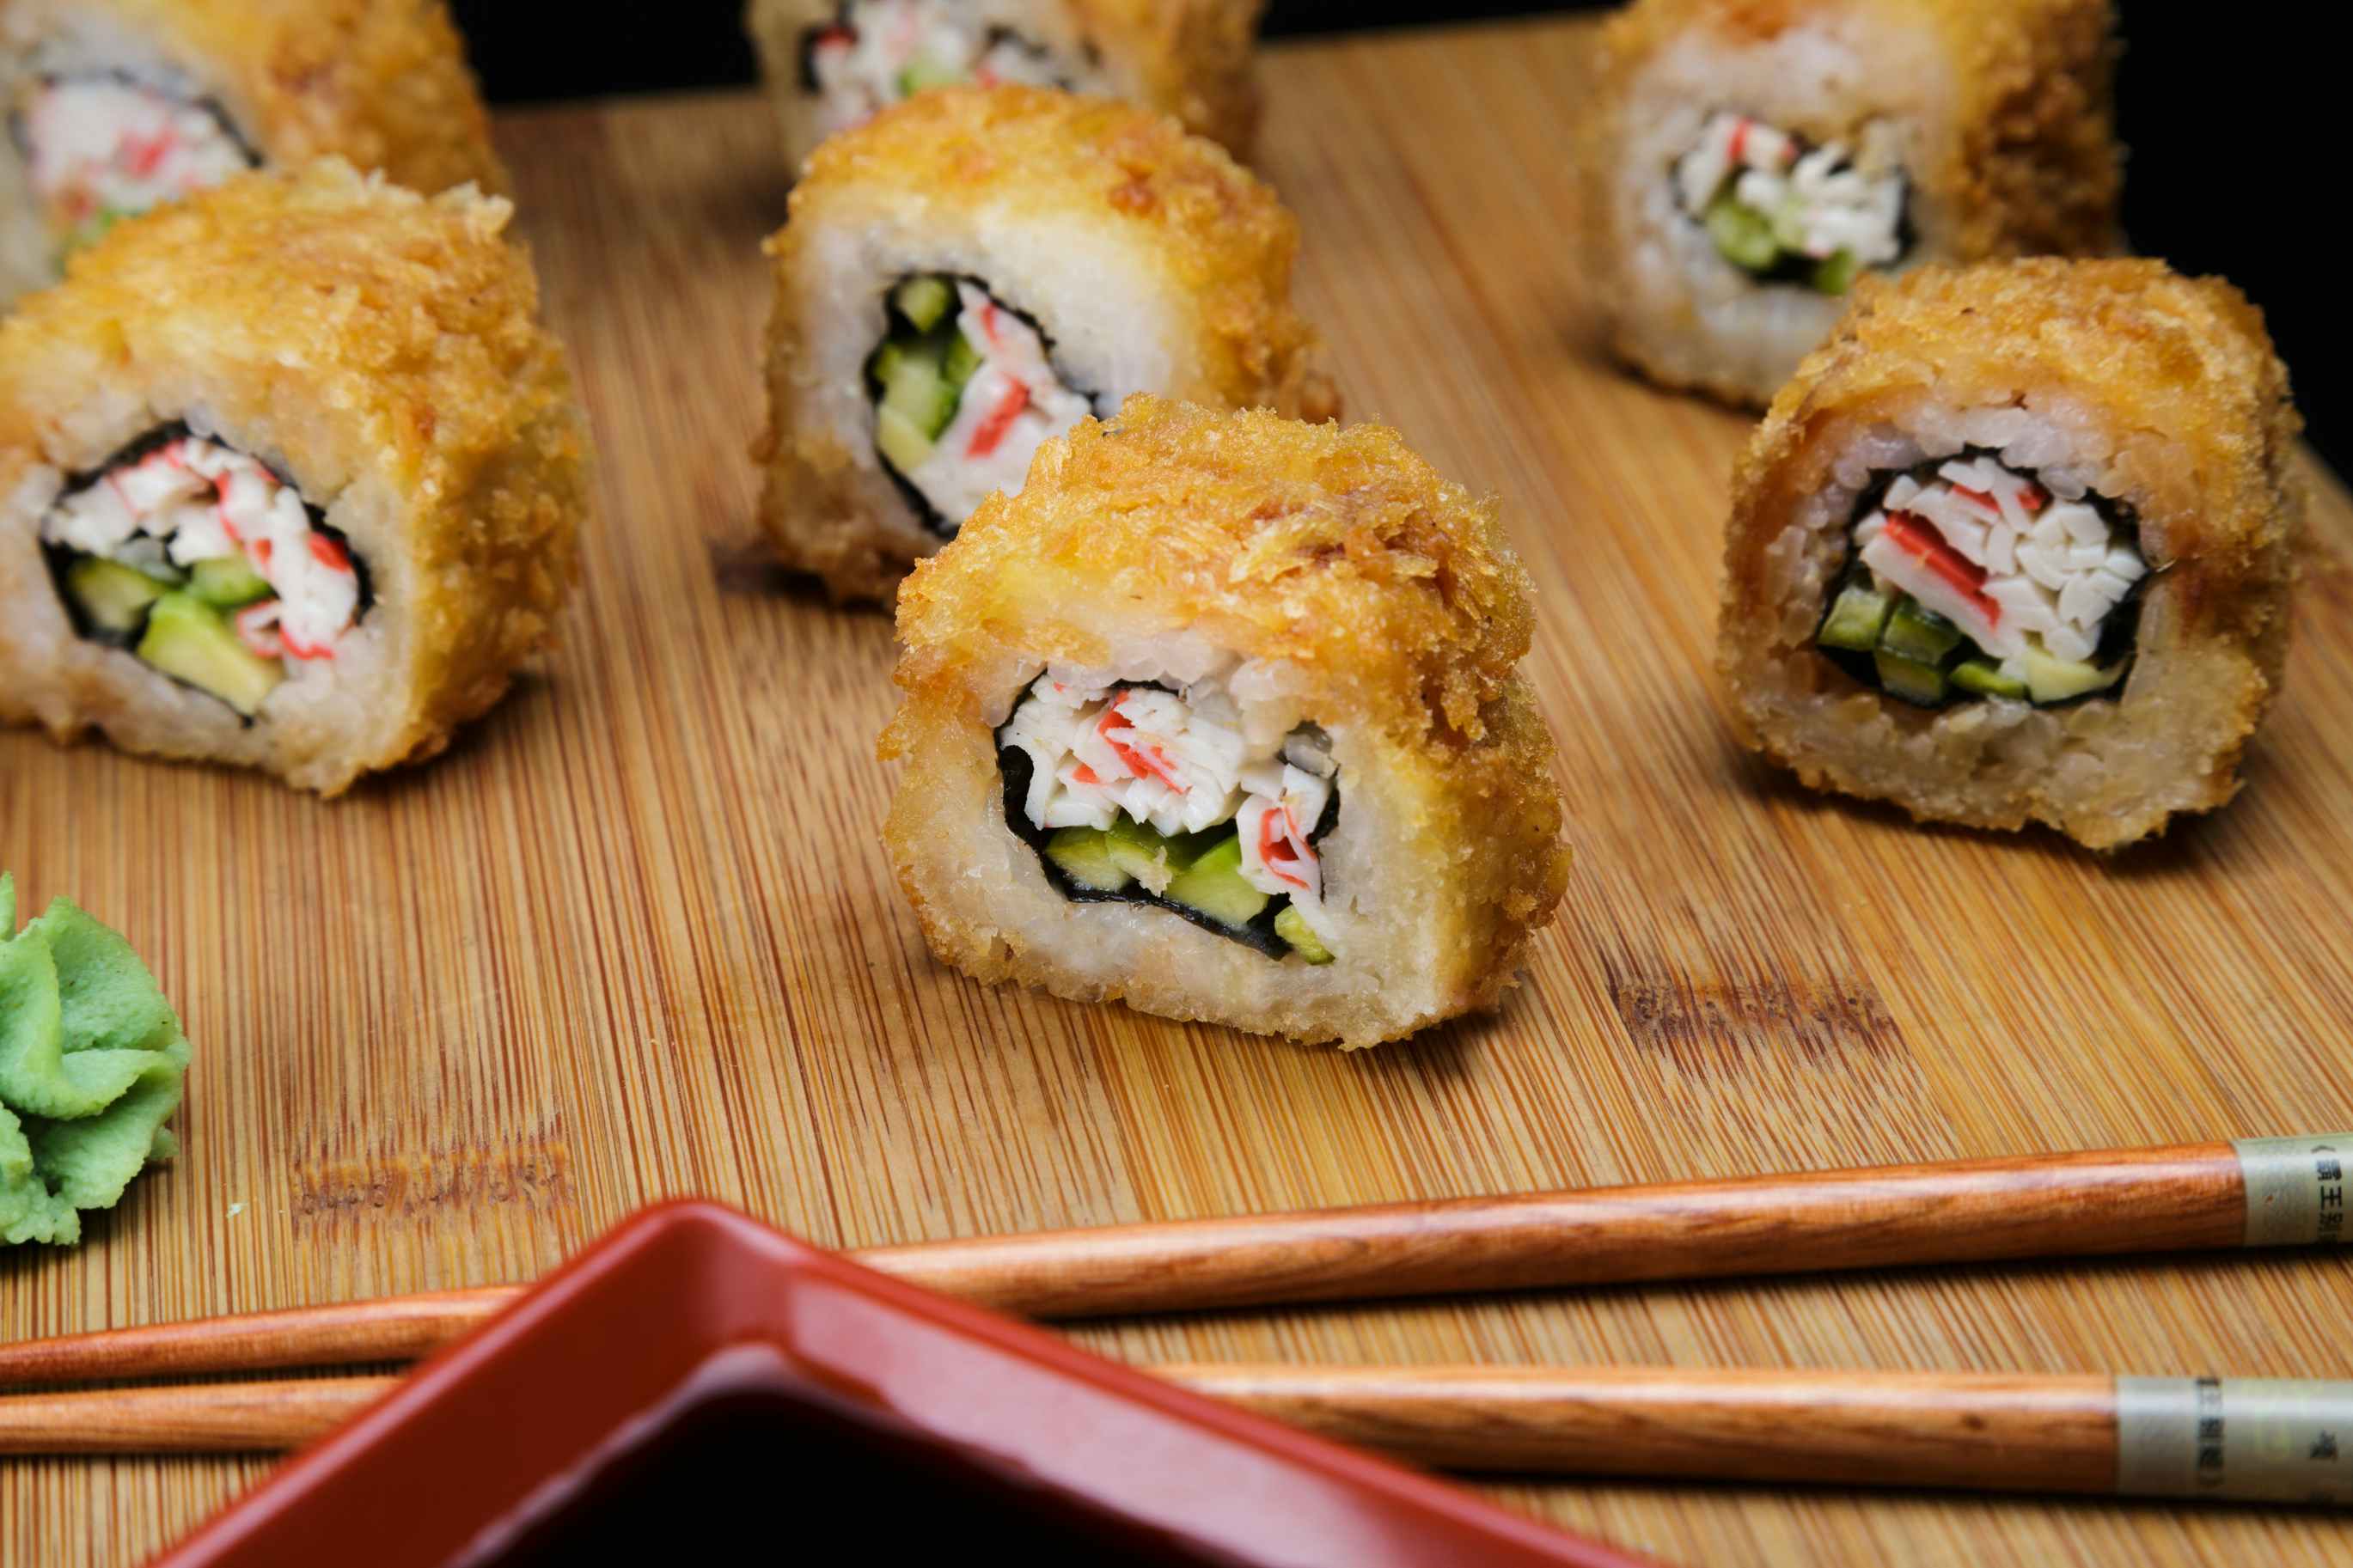 Fried sushi on a wooden board